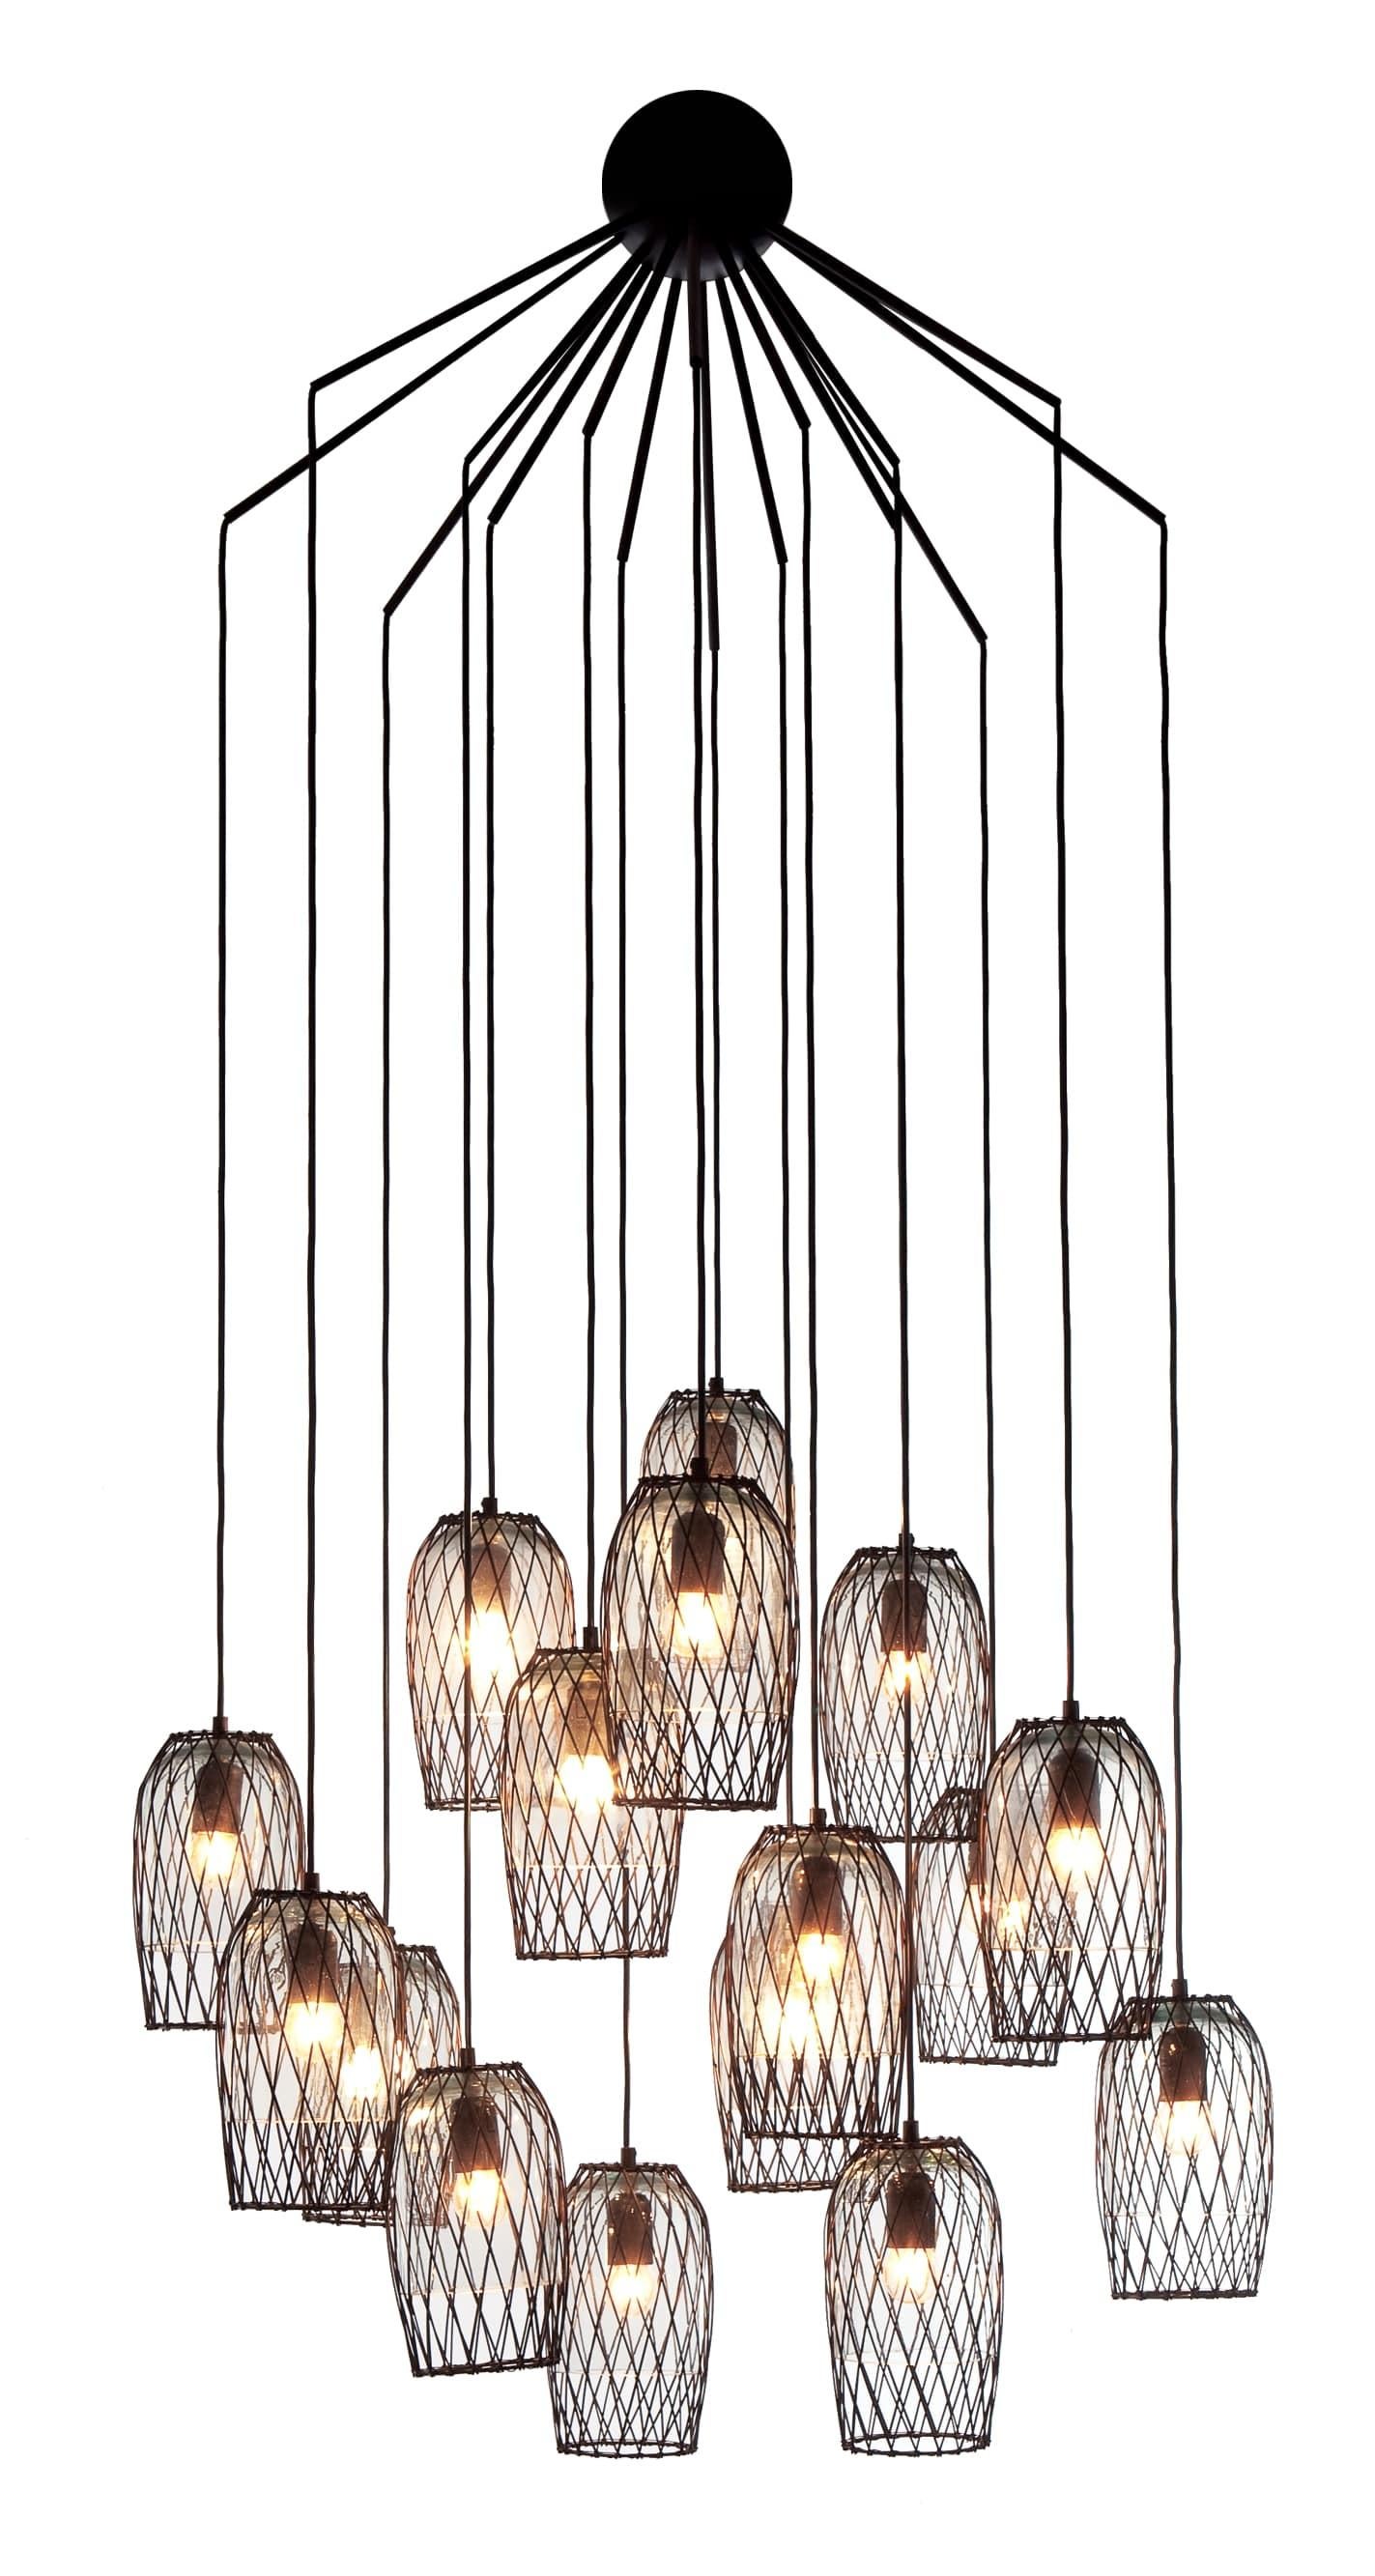 Constellation 16 pendant light, Kenneth Cobonpue
Materials: Buri (palm leaf spines), powder-coated steel, glass
Dimensions: 86.5 x 150 cm 

All our lamps can be wired according to each country. If sold to the USA it will be wired for the USA for